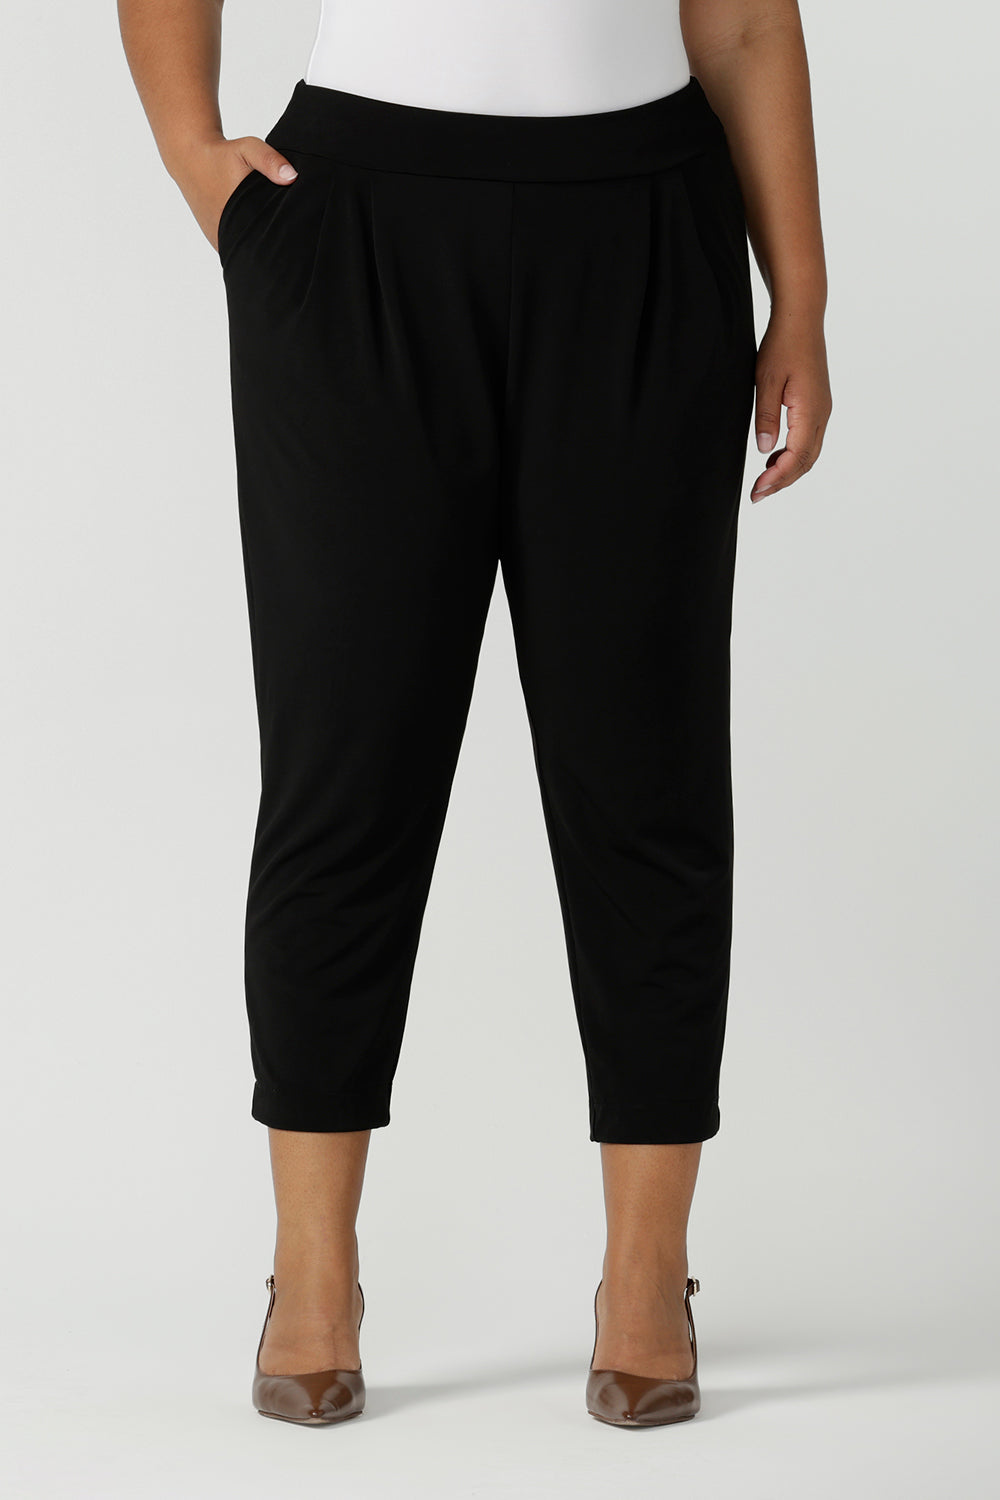 Close up of plus size pants for travel, these tapered leg, black jersey pants are super comfortable to wear! These dropped crotch pull-on pants are made in Australia. Shop women's travel pants online in petite, mid size and plus sizes at Leina & Fleur.